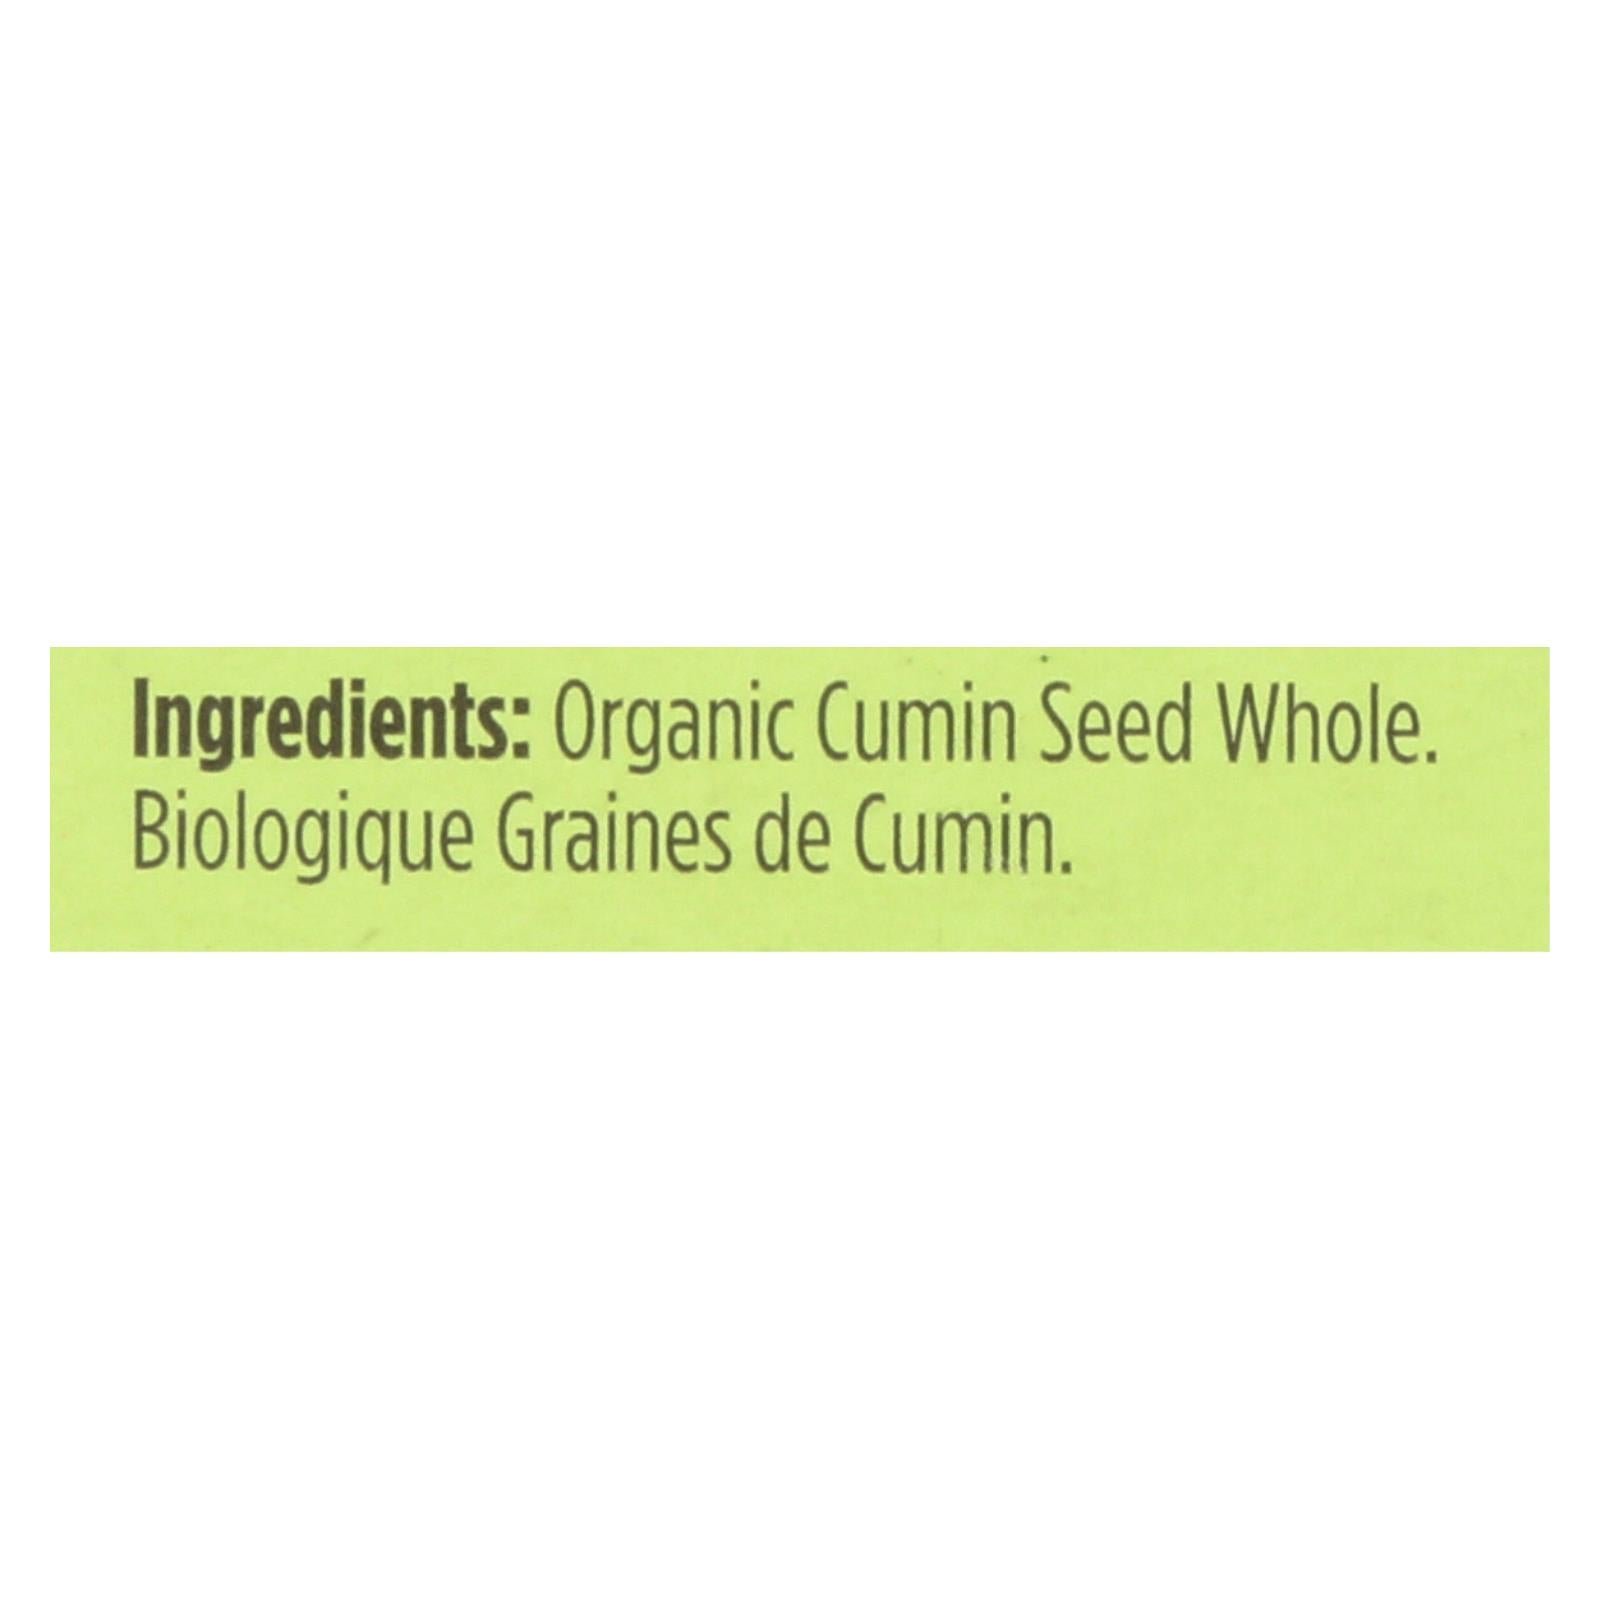 Buy Spicely Organics - Organic Cumin Seed - Whole - Case Of 6 - 0.5 Oz.  at OnlyNaturals.us